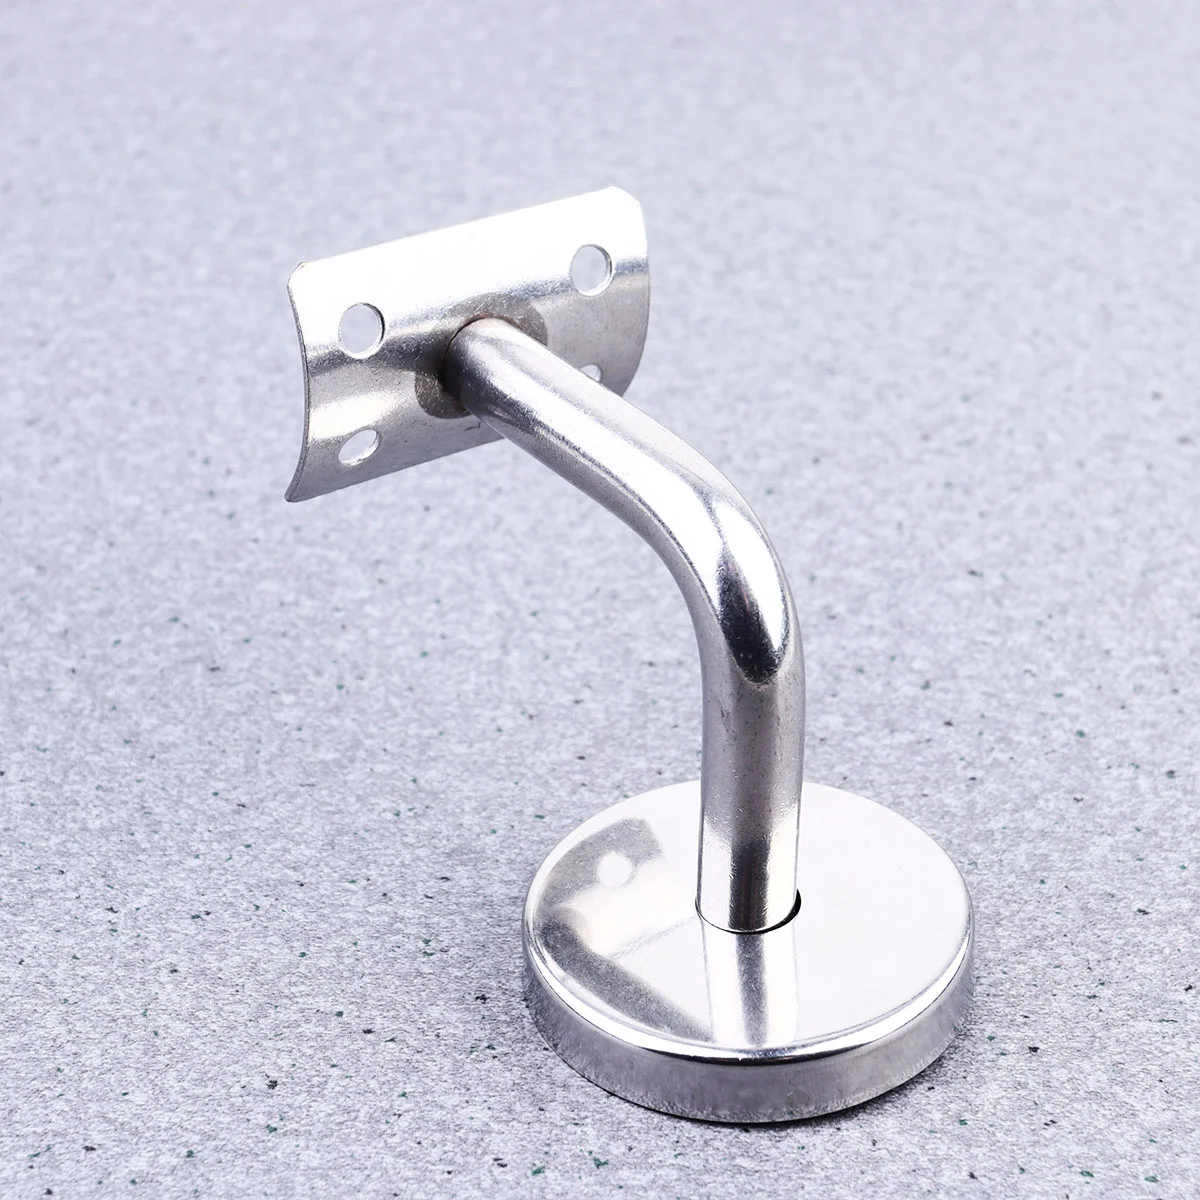 Hardware Handrail Brackets Bracketsupport Railing Metal Outdoor Bannister Staircases Silver Hand Rail Mounting Stainless Steel Stair 